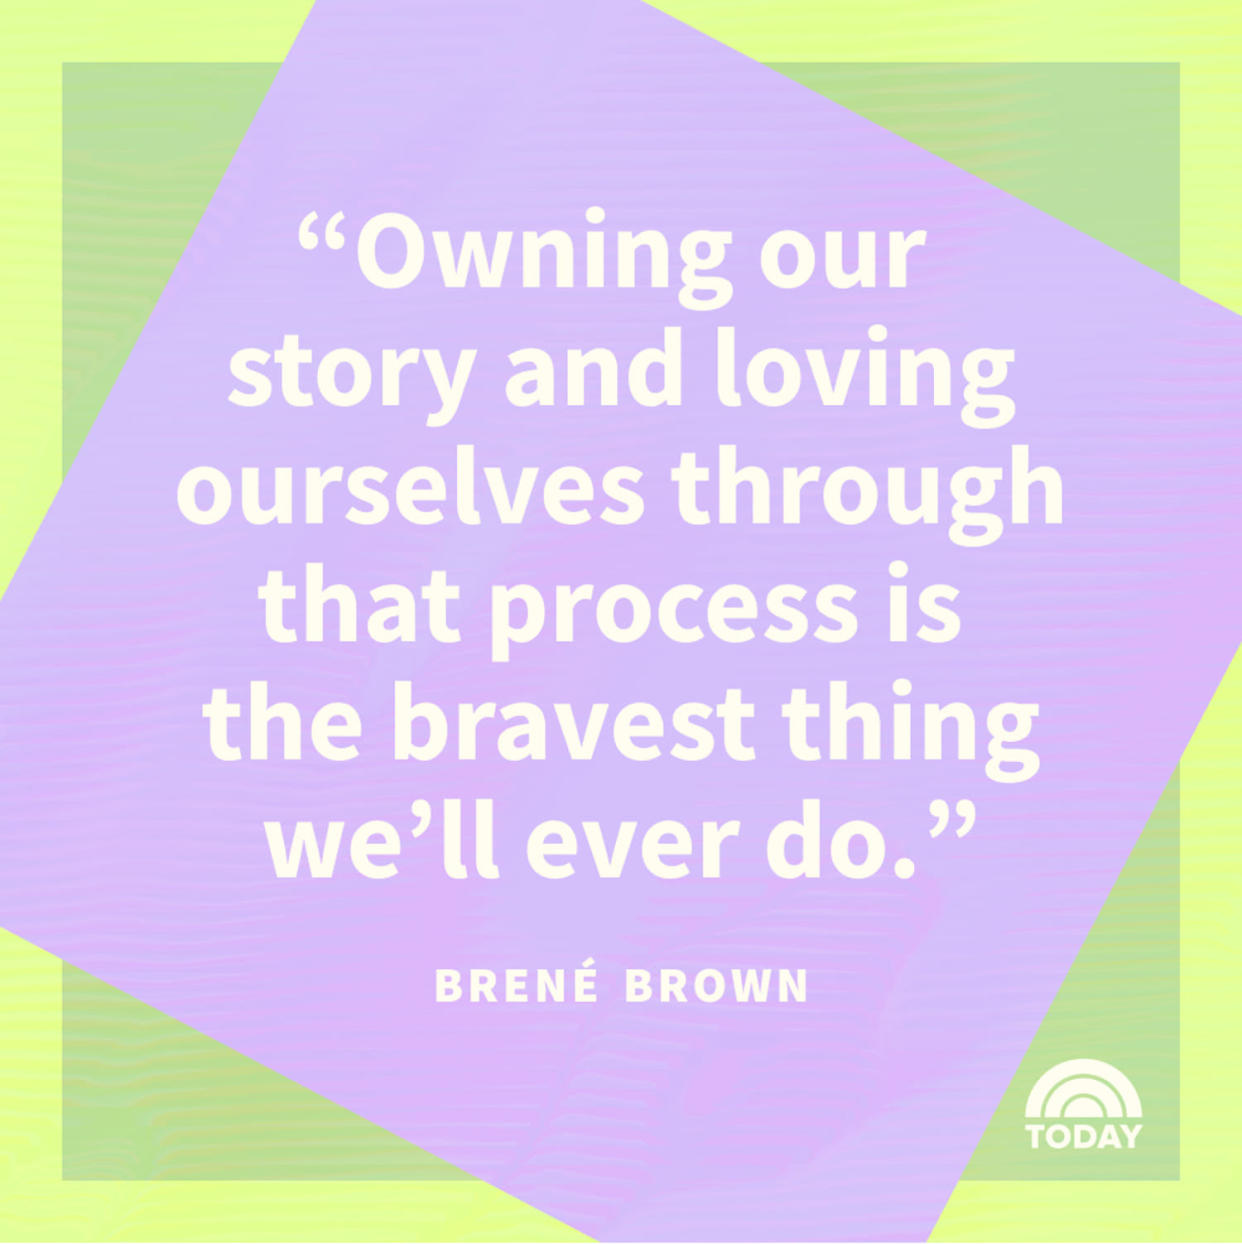 pride quote from Brene Brown